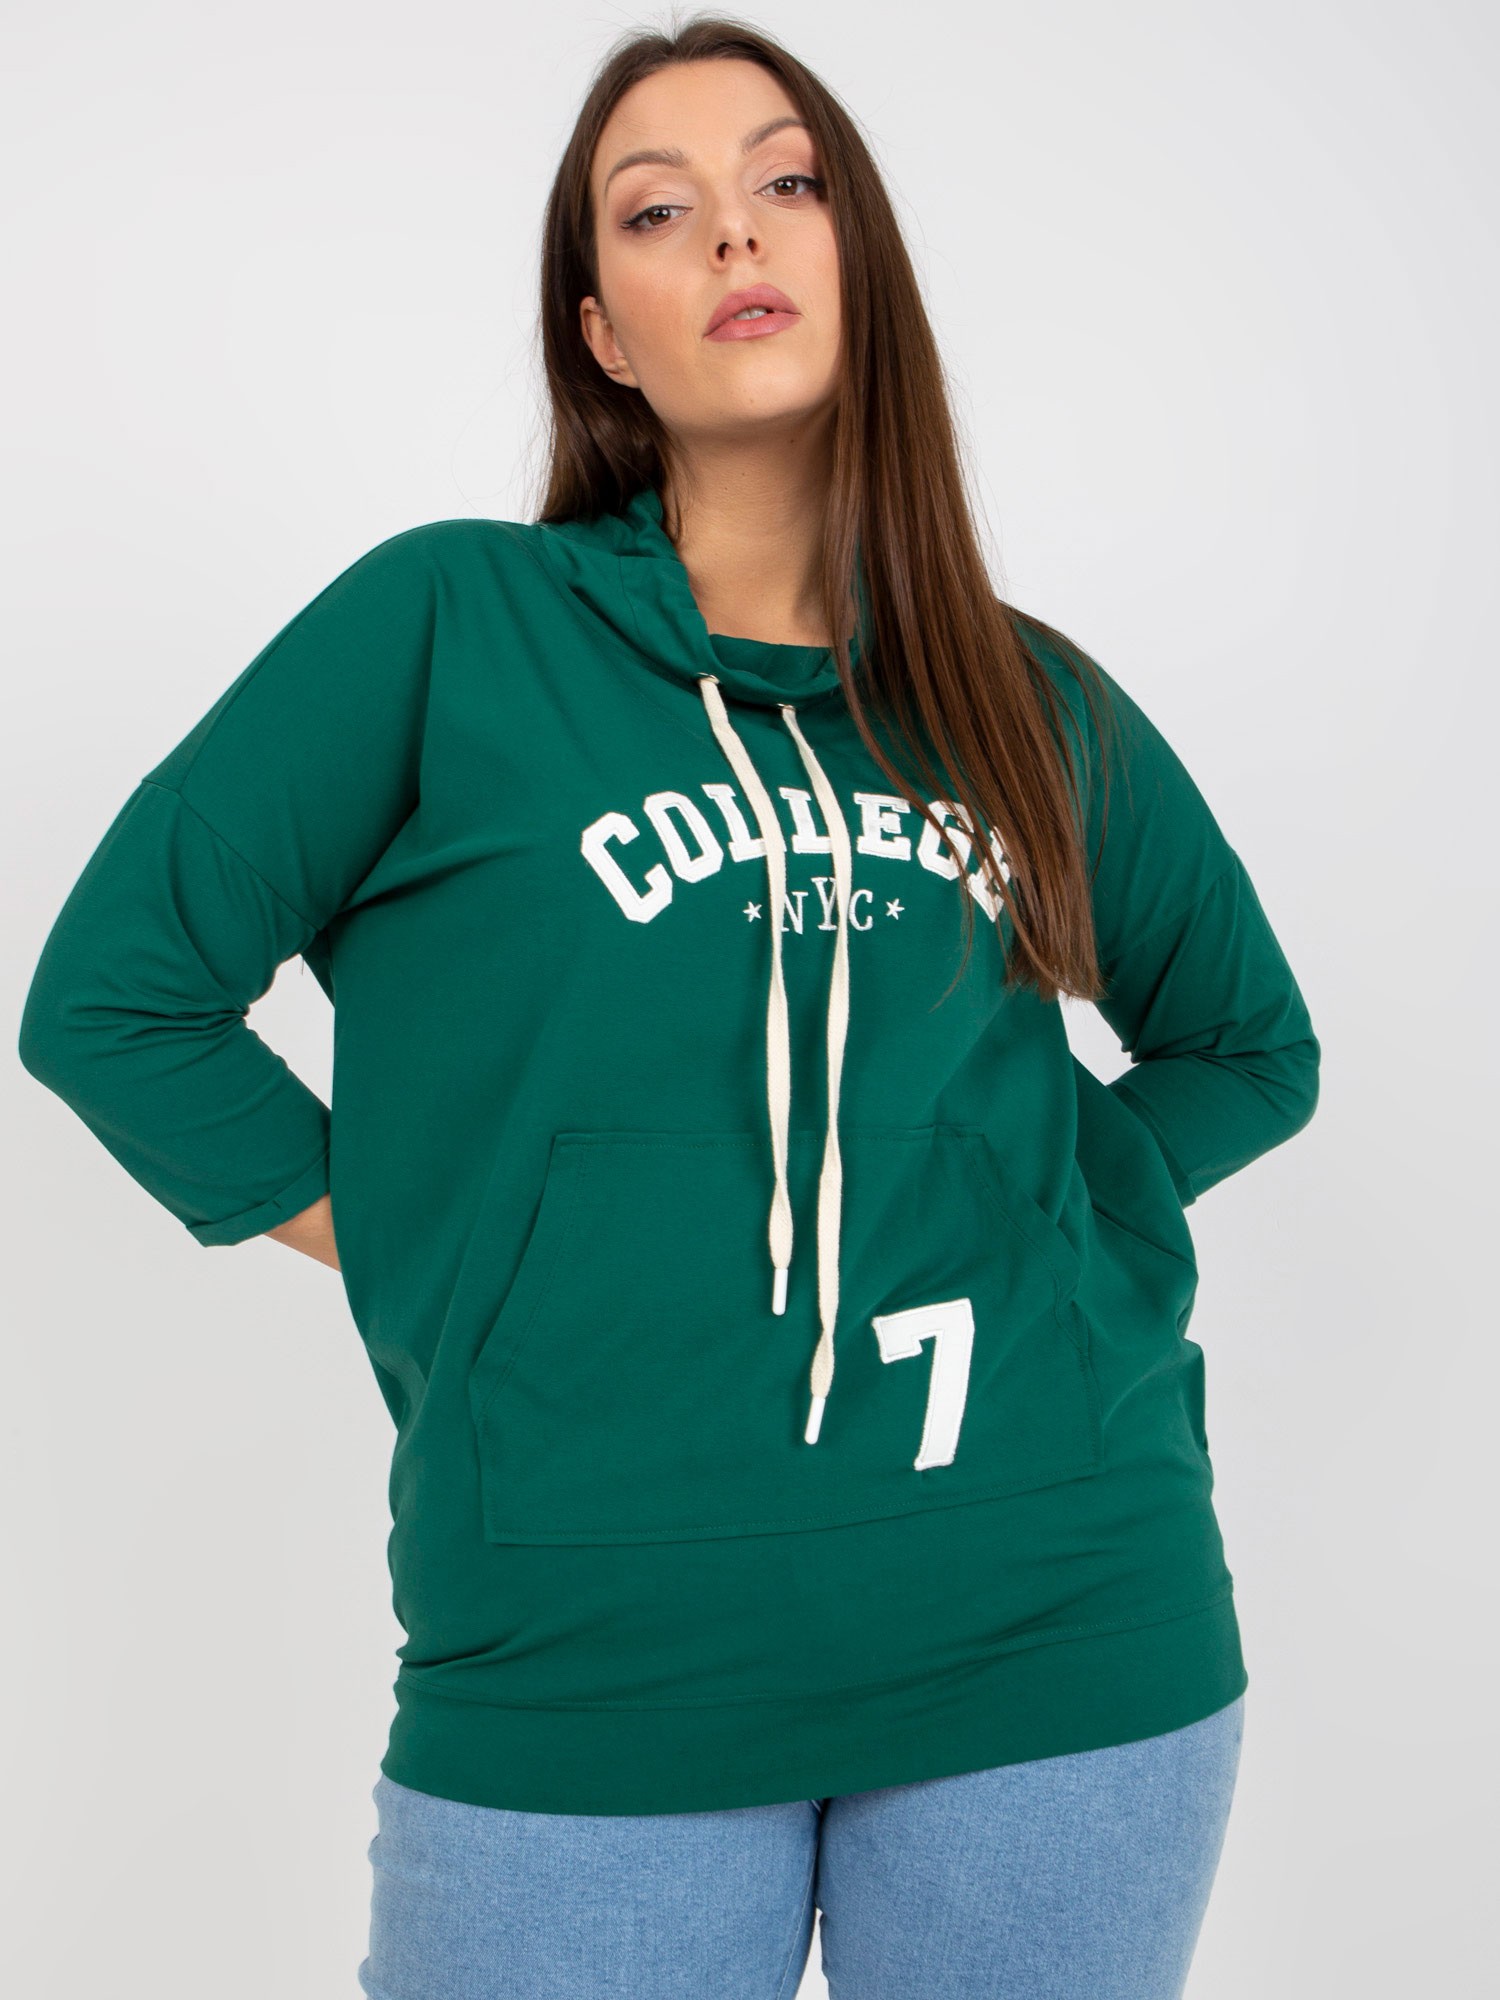 Dark green plus size blouse in sporty style